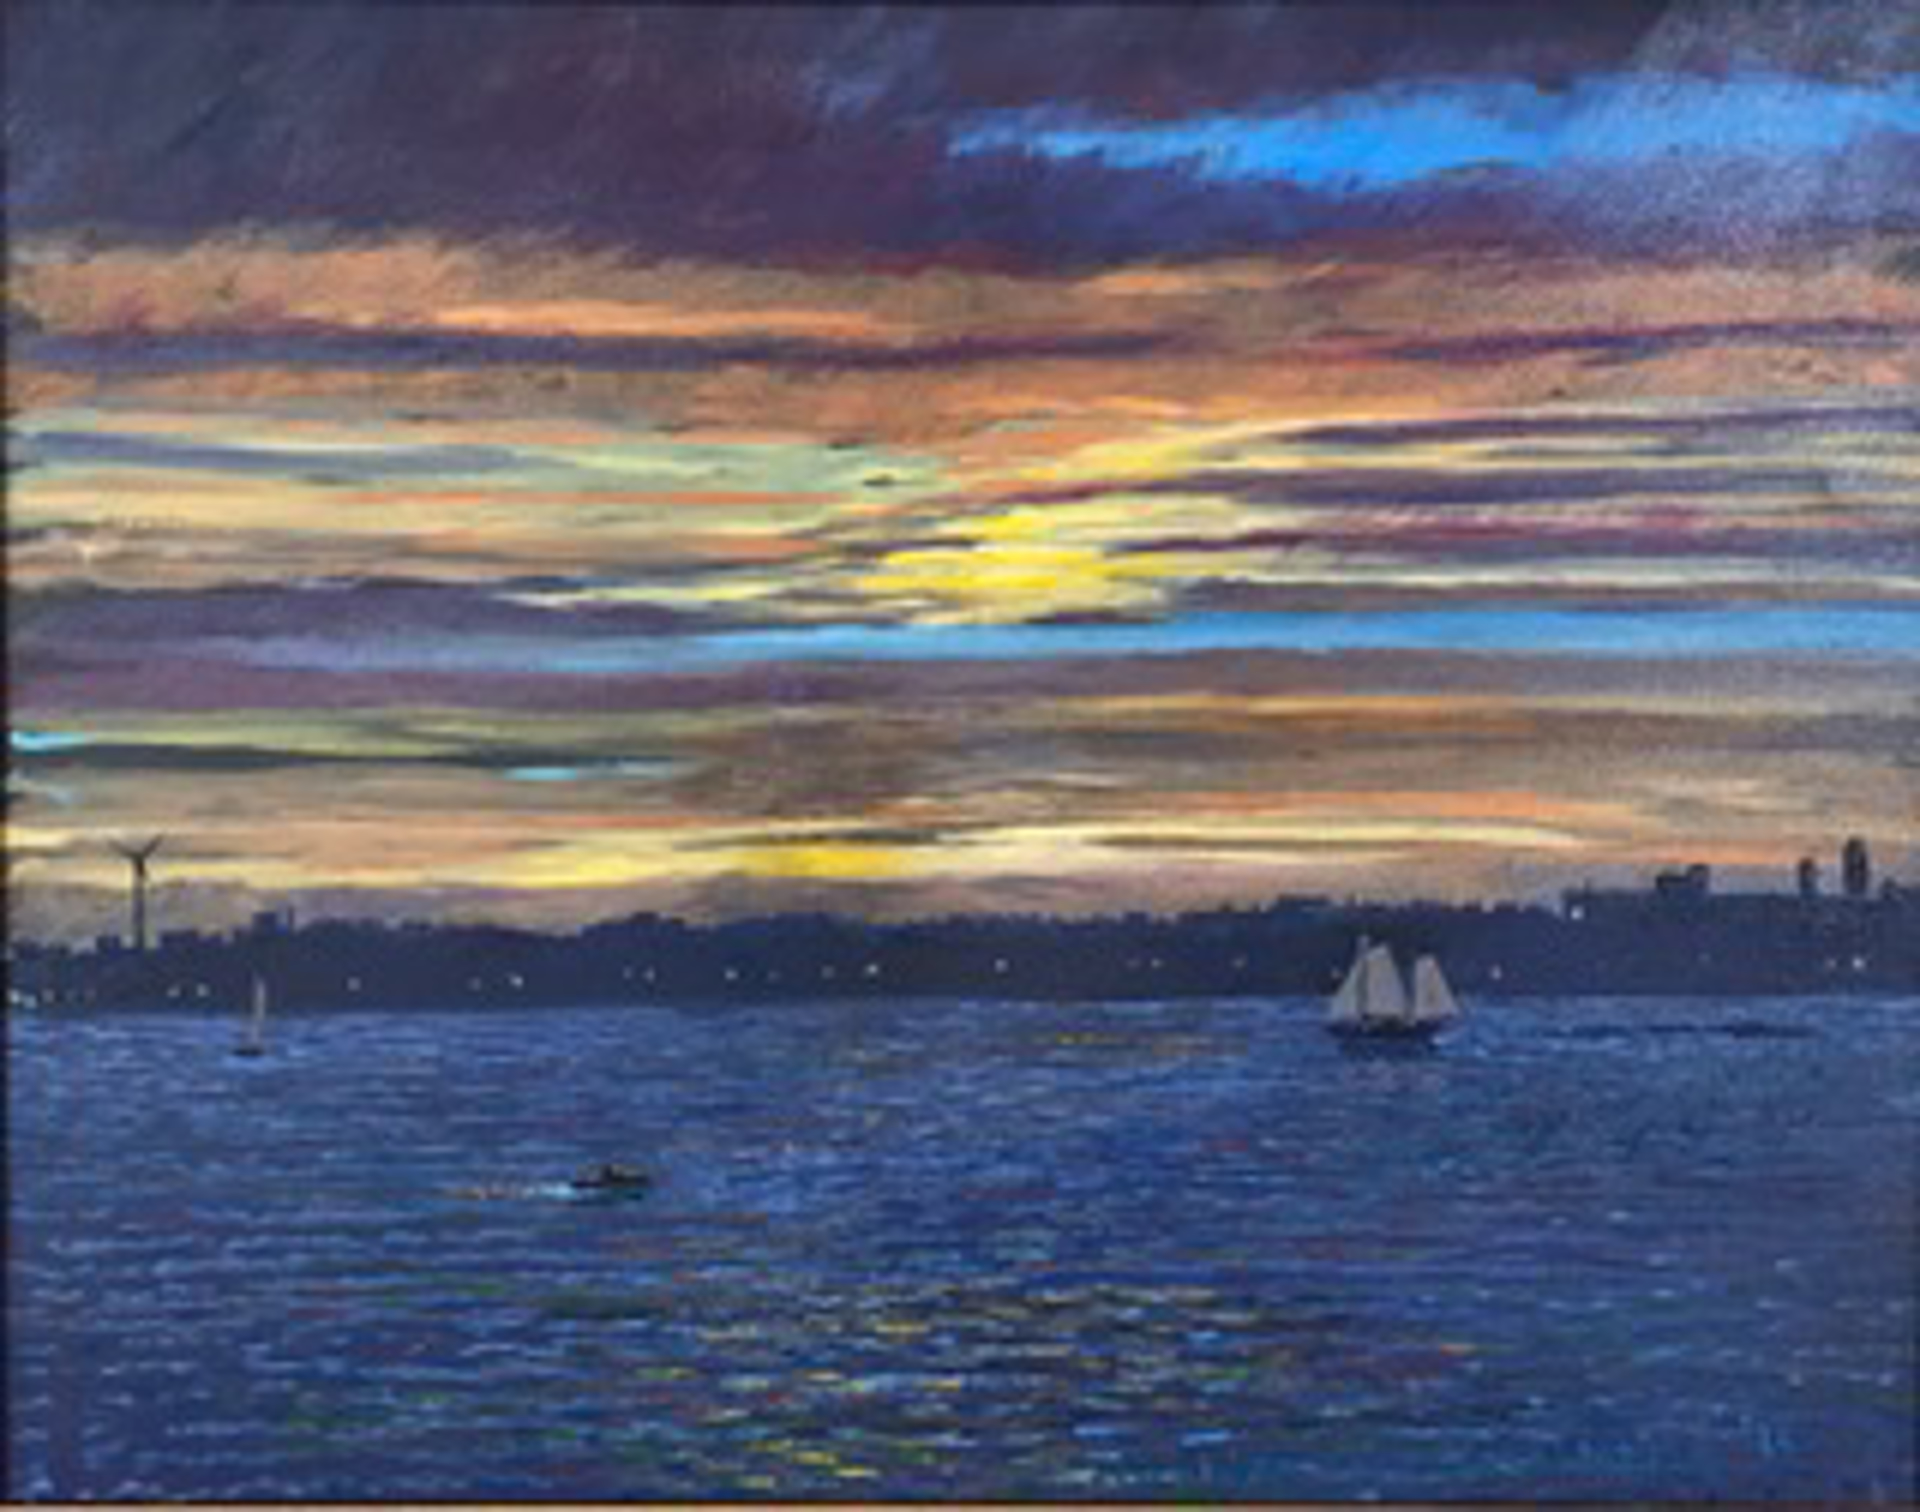 Afterglow - Gloucester Harbor by Geoffrey Teale Chalmers